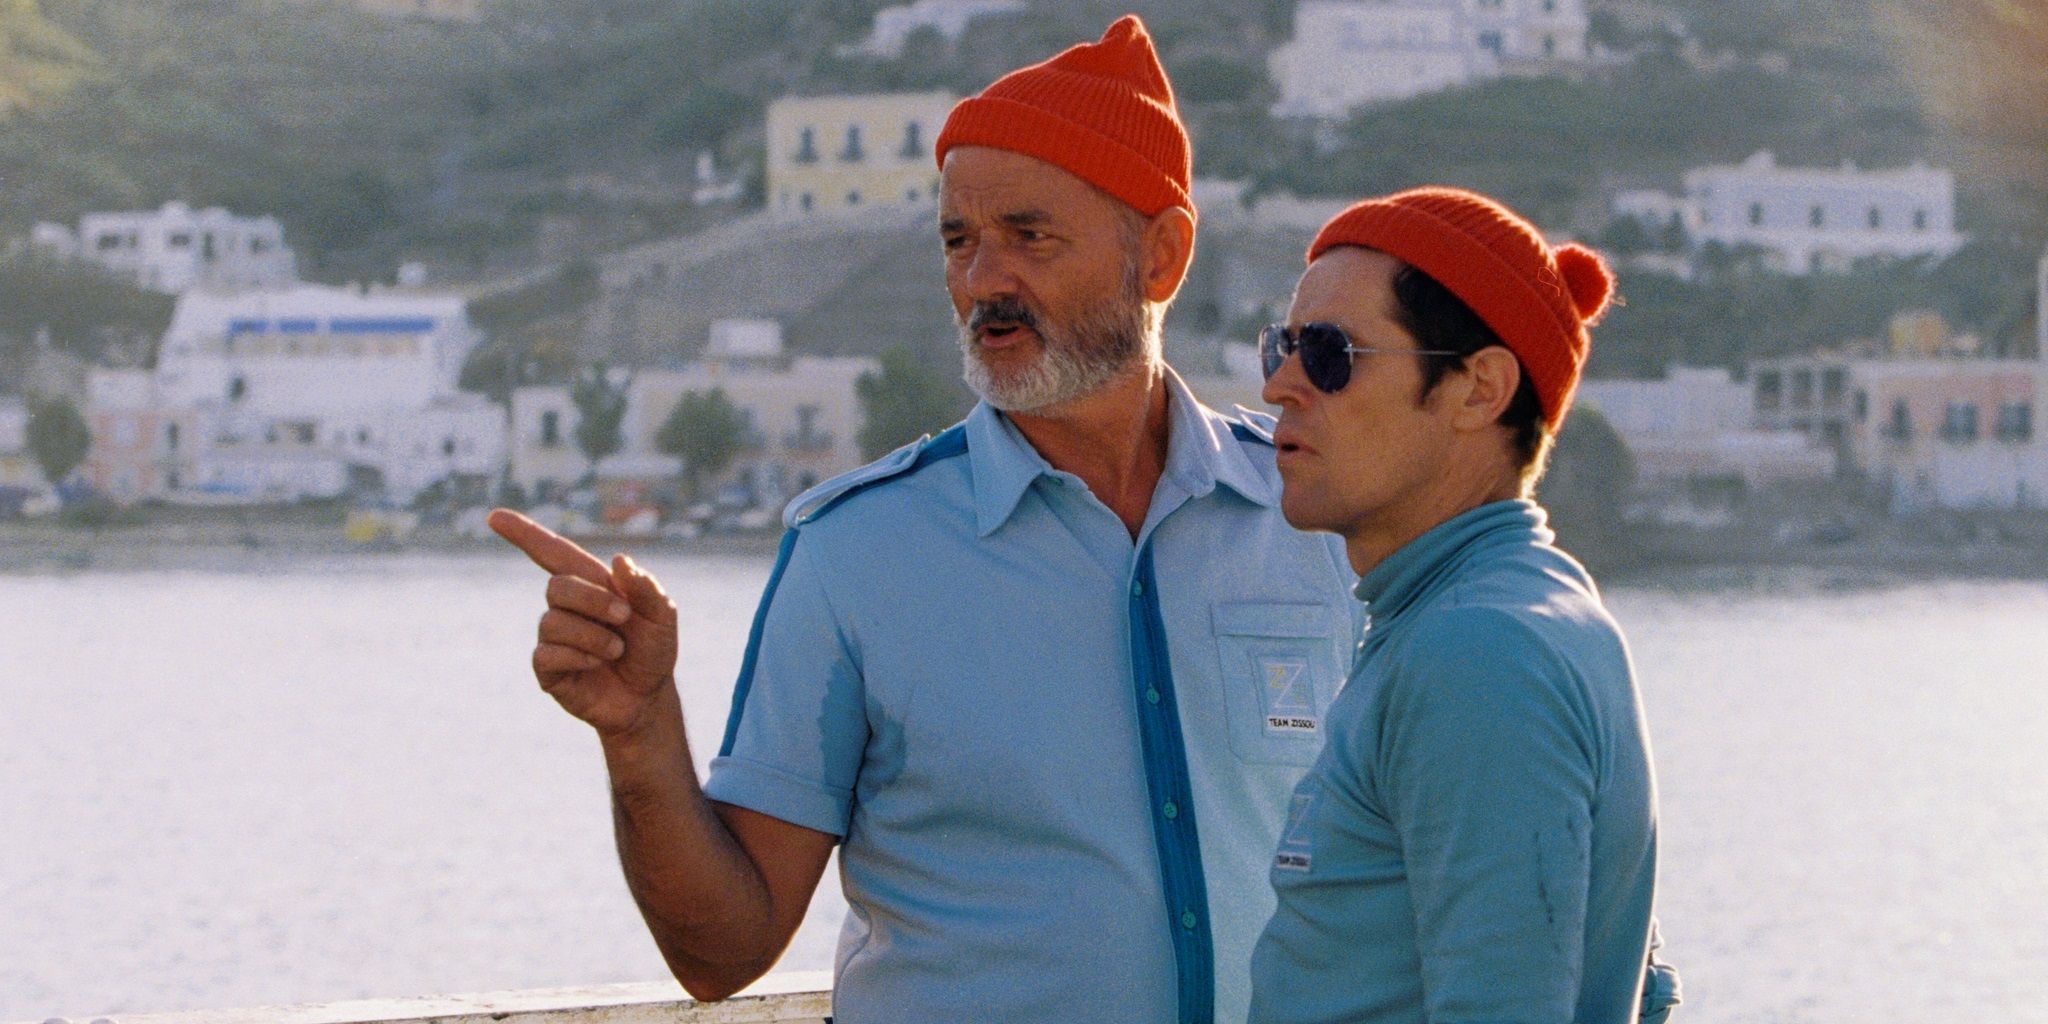 The 10 Funniest Scenes From Wes Anderson Movies Ranked